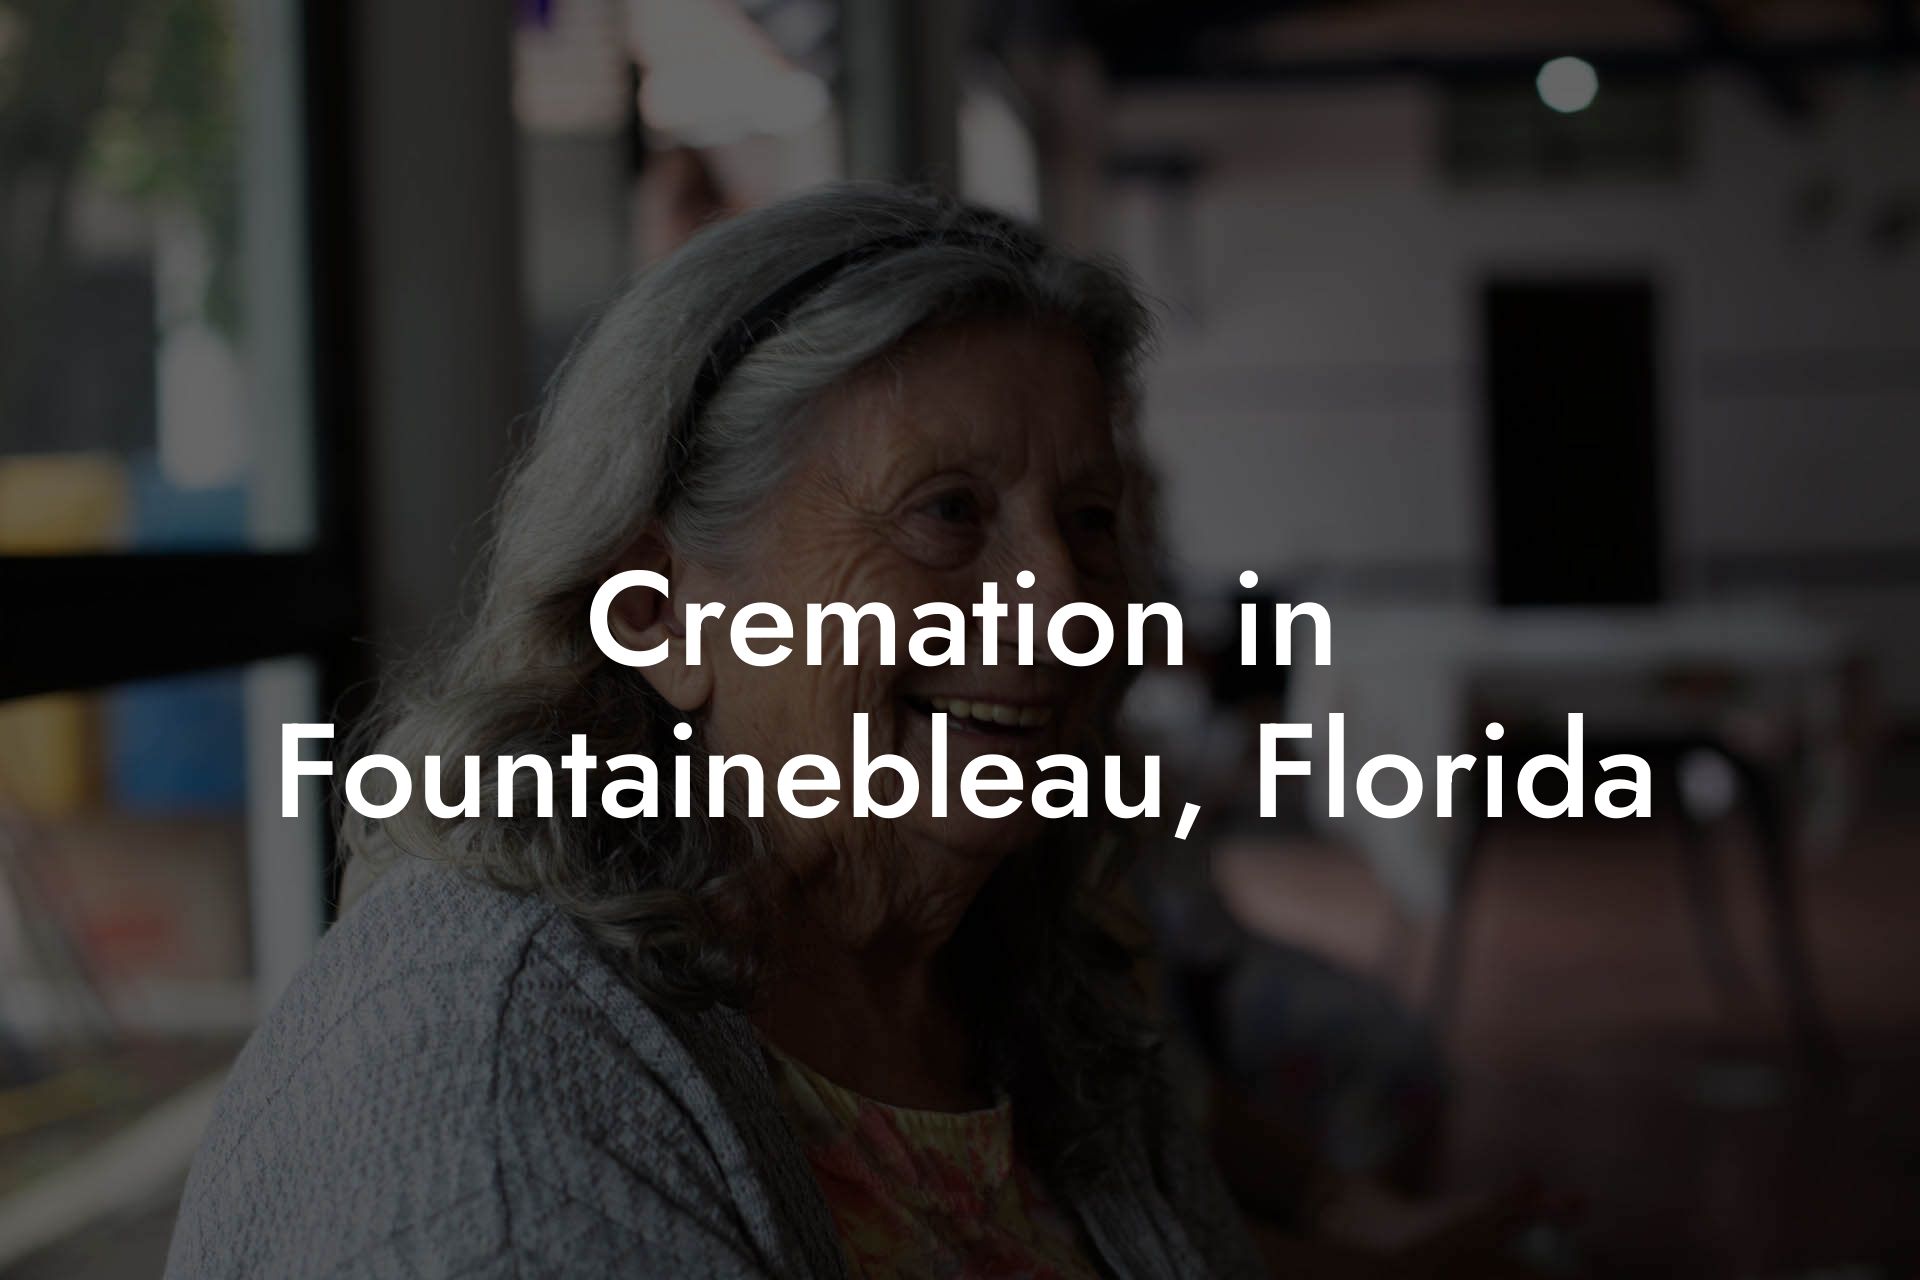 Cremation in Fountainebleau, Florida